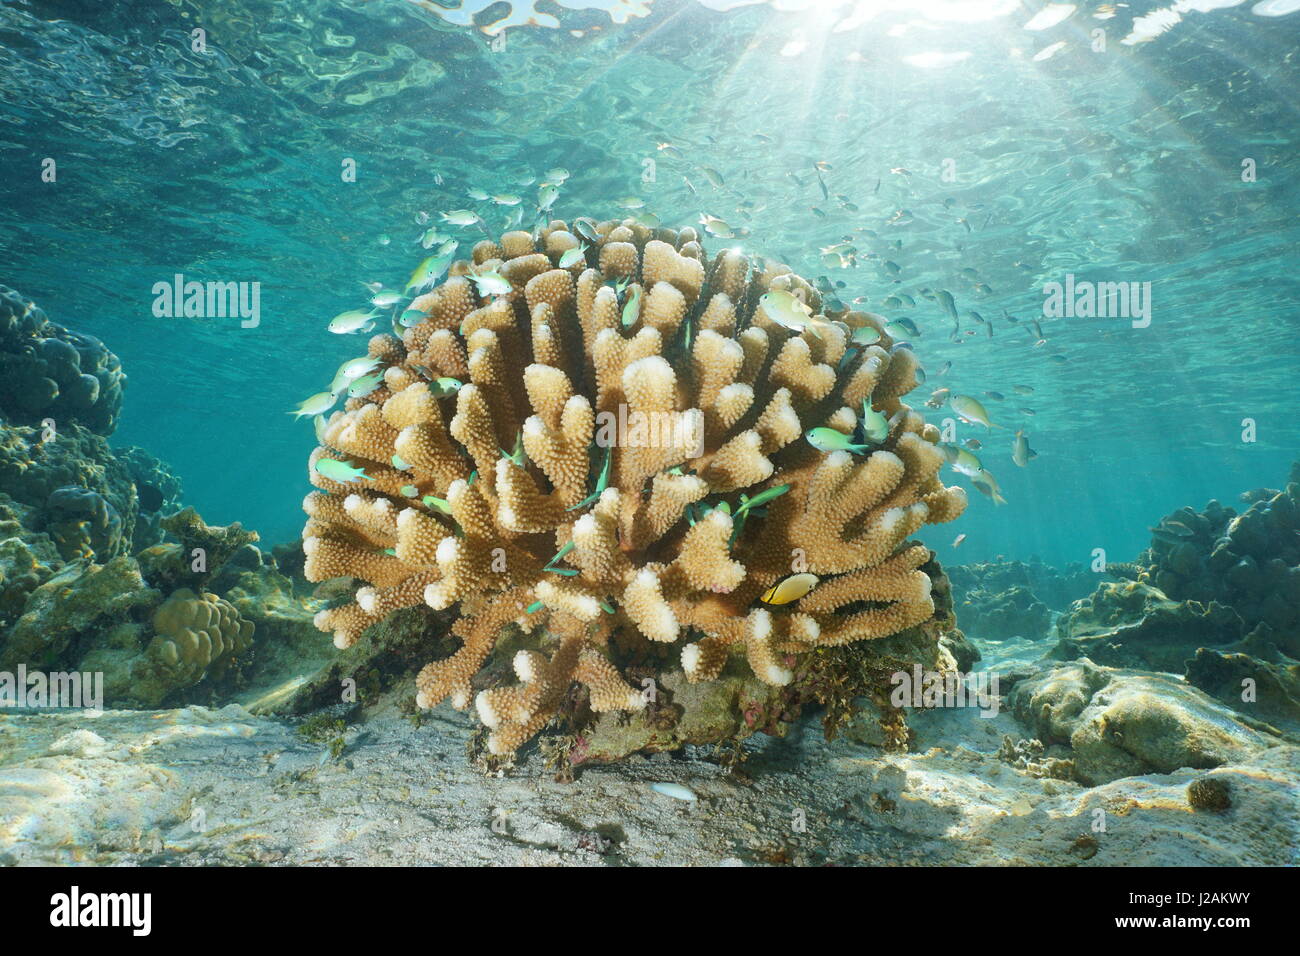 Pocillopora coral underwater with tropical fish Blue-green chromis and natural sunlight from sea surface, Bora Bora, Pacific ocean, French Polynesia Stock Photo